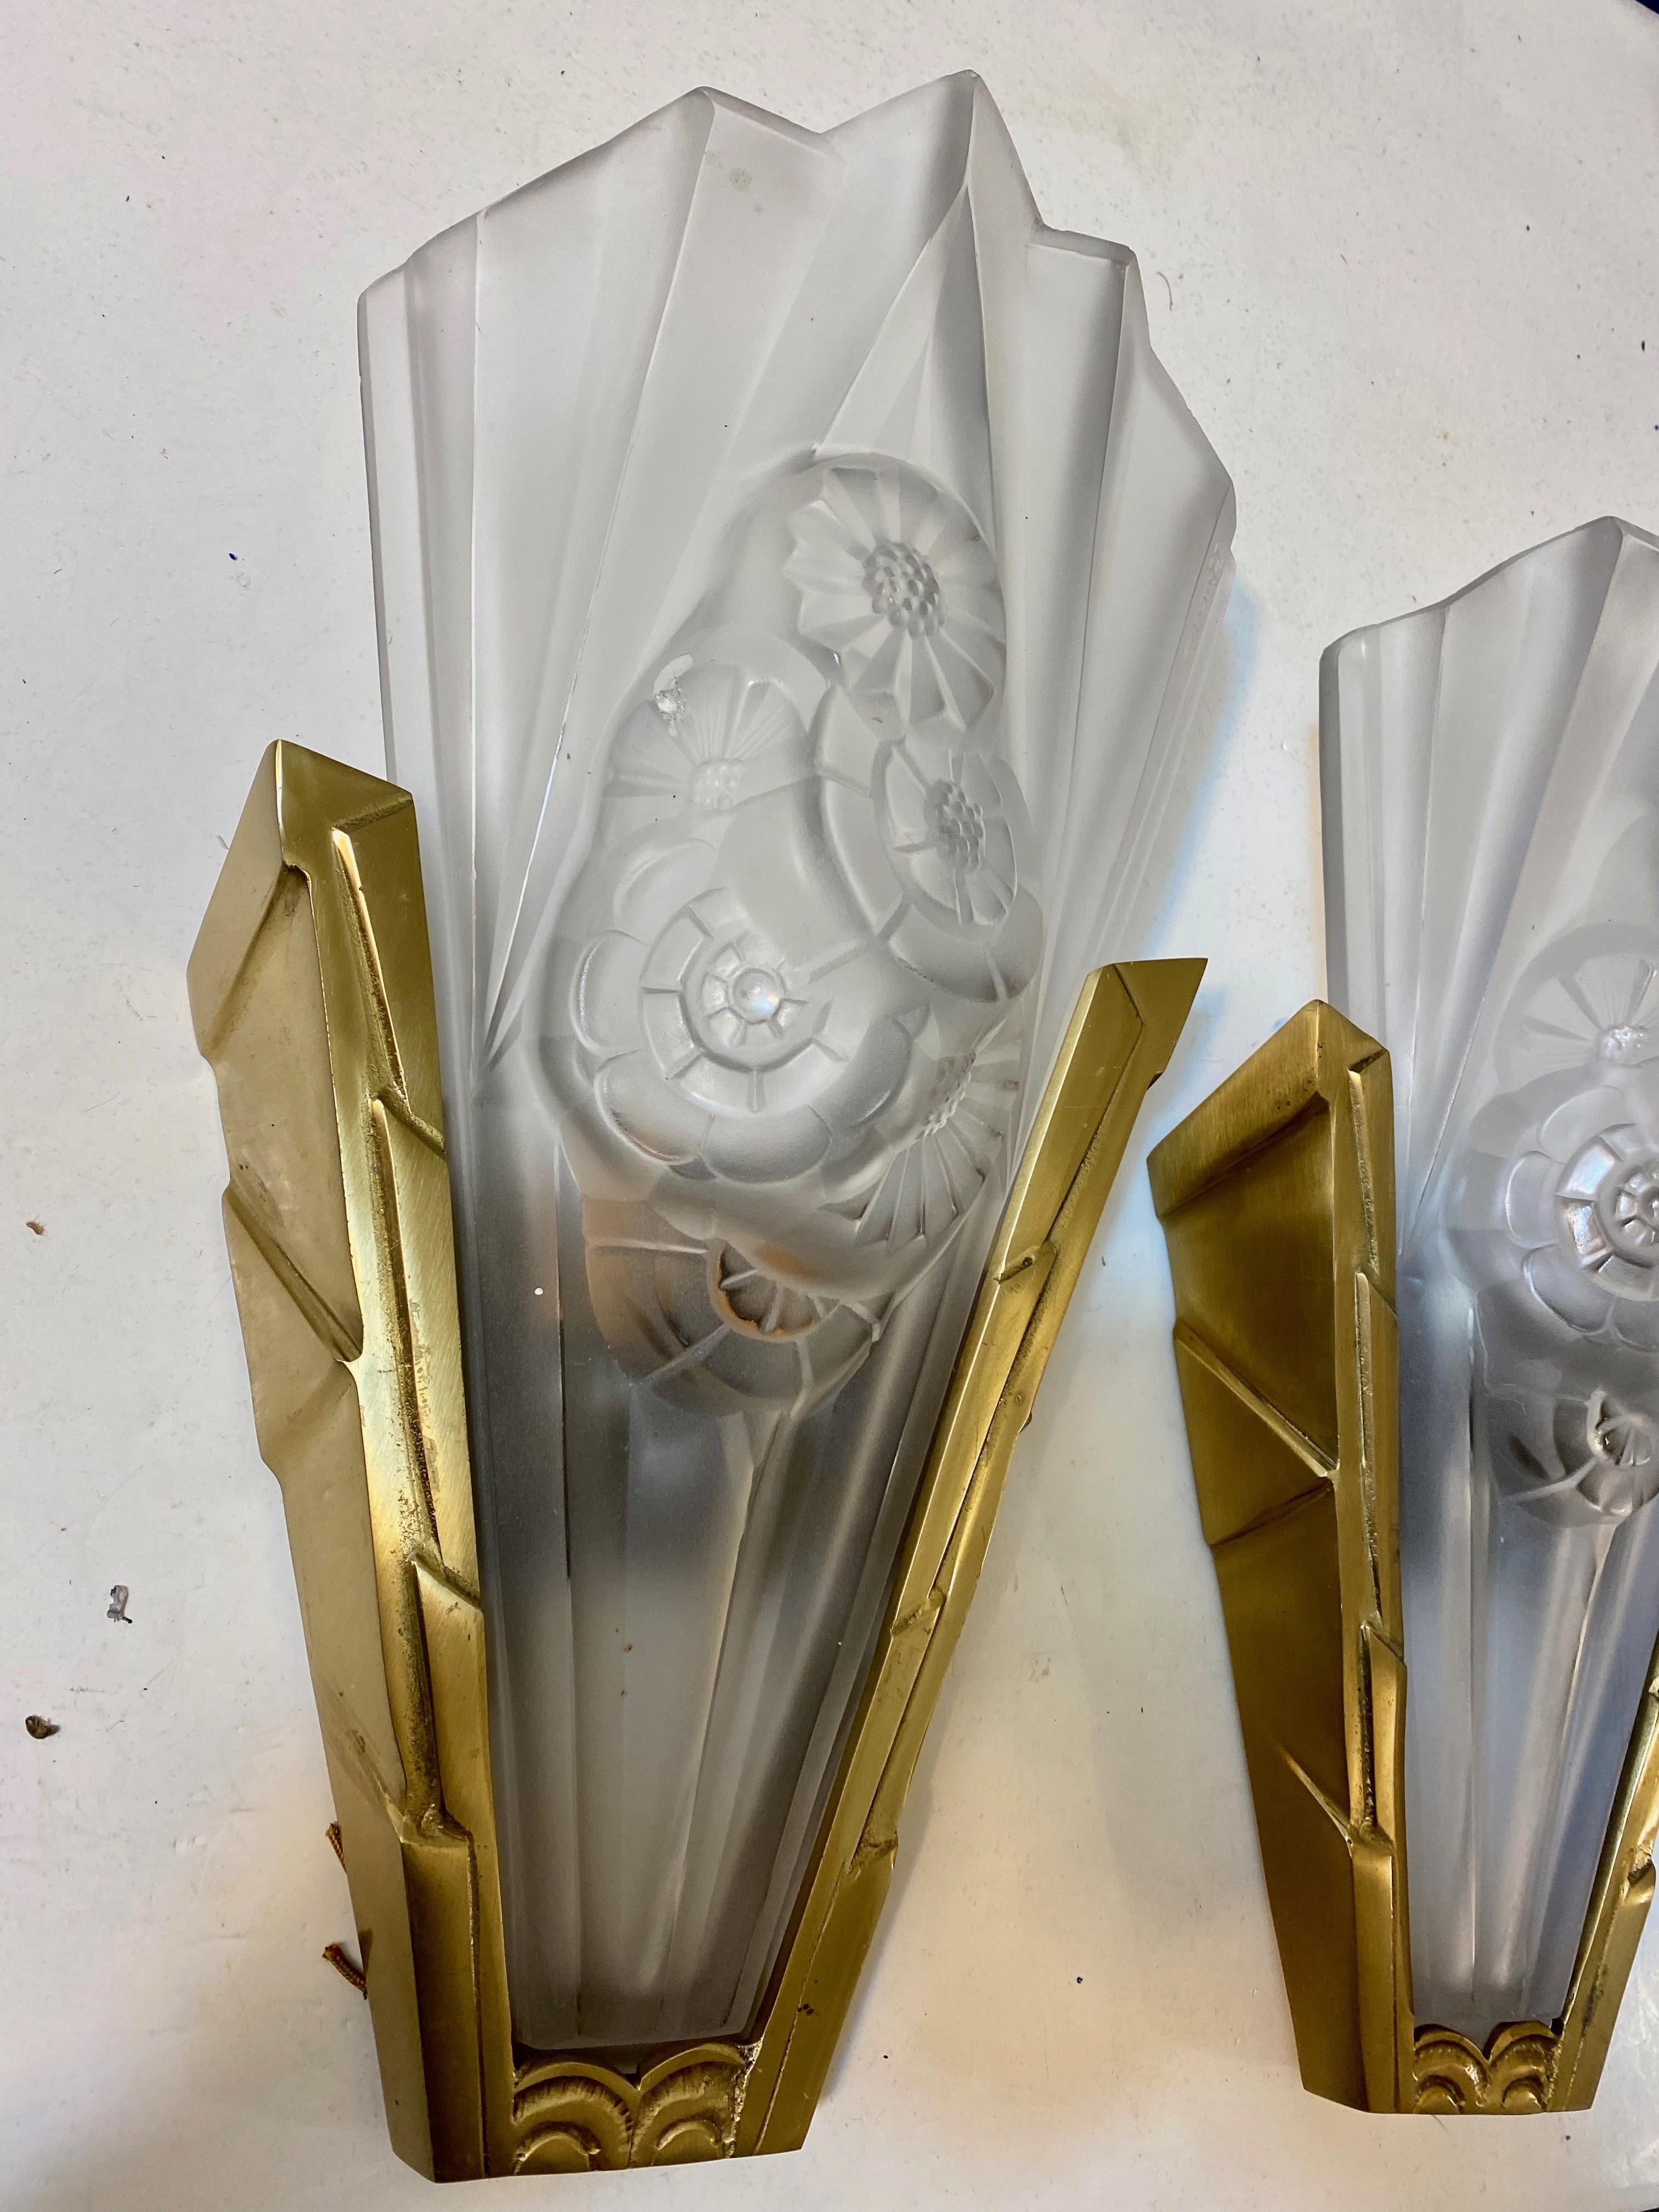 Pair of French Art Deco wall sconces by the French artist Degue. Clear frosted glass shades decorated with geometric and floral motifs. Held by geometric brass design frames. Each glass shade is marked DEGUE. Has been rewired for American use with